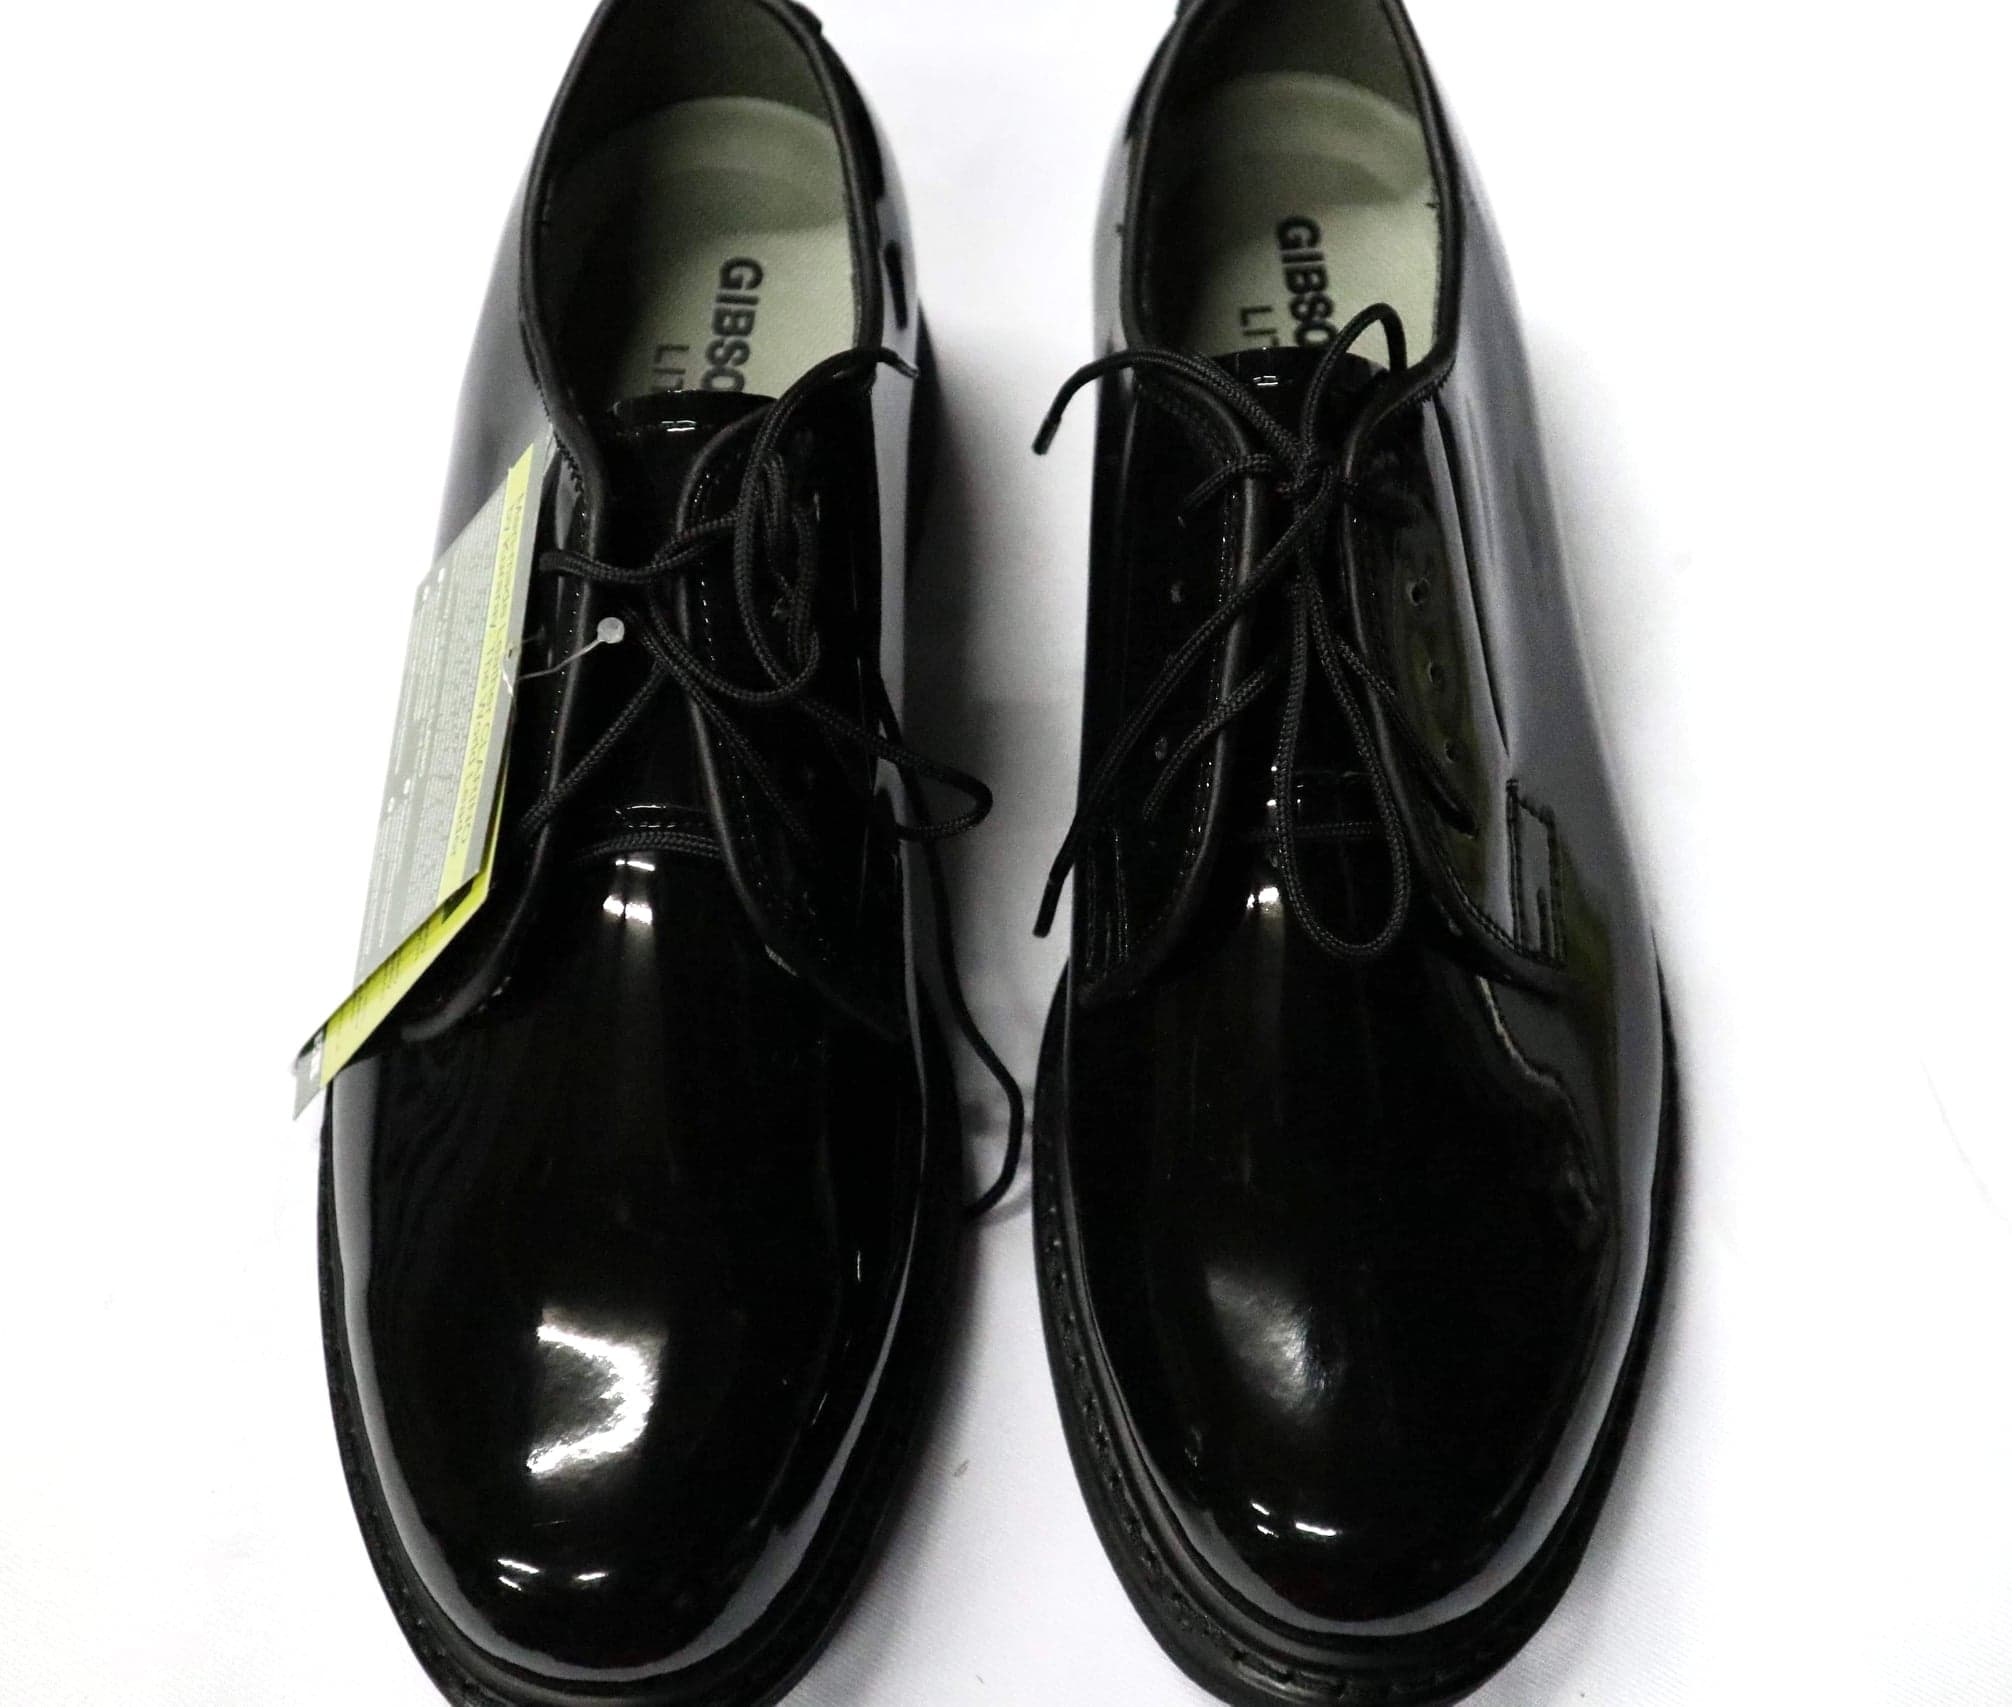 Gibson 's Lites Black Shoes 100 